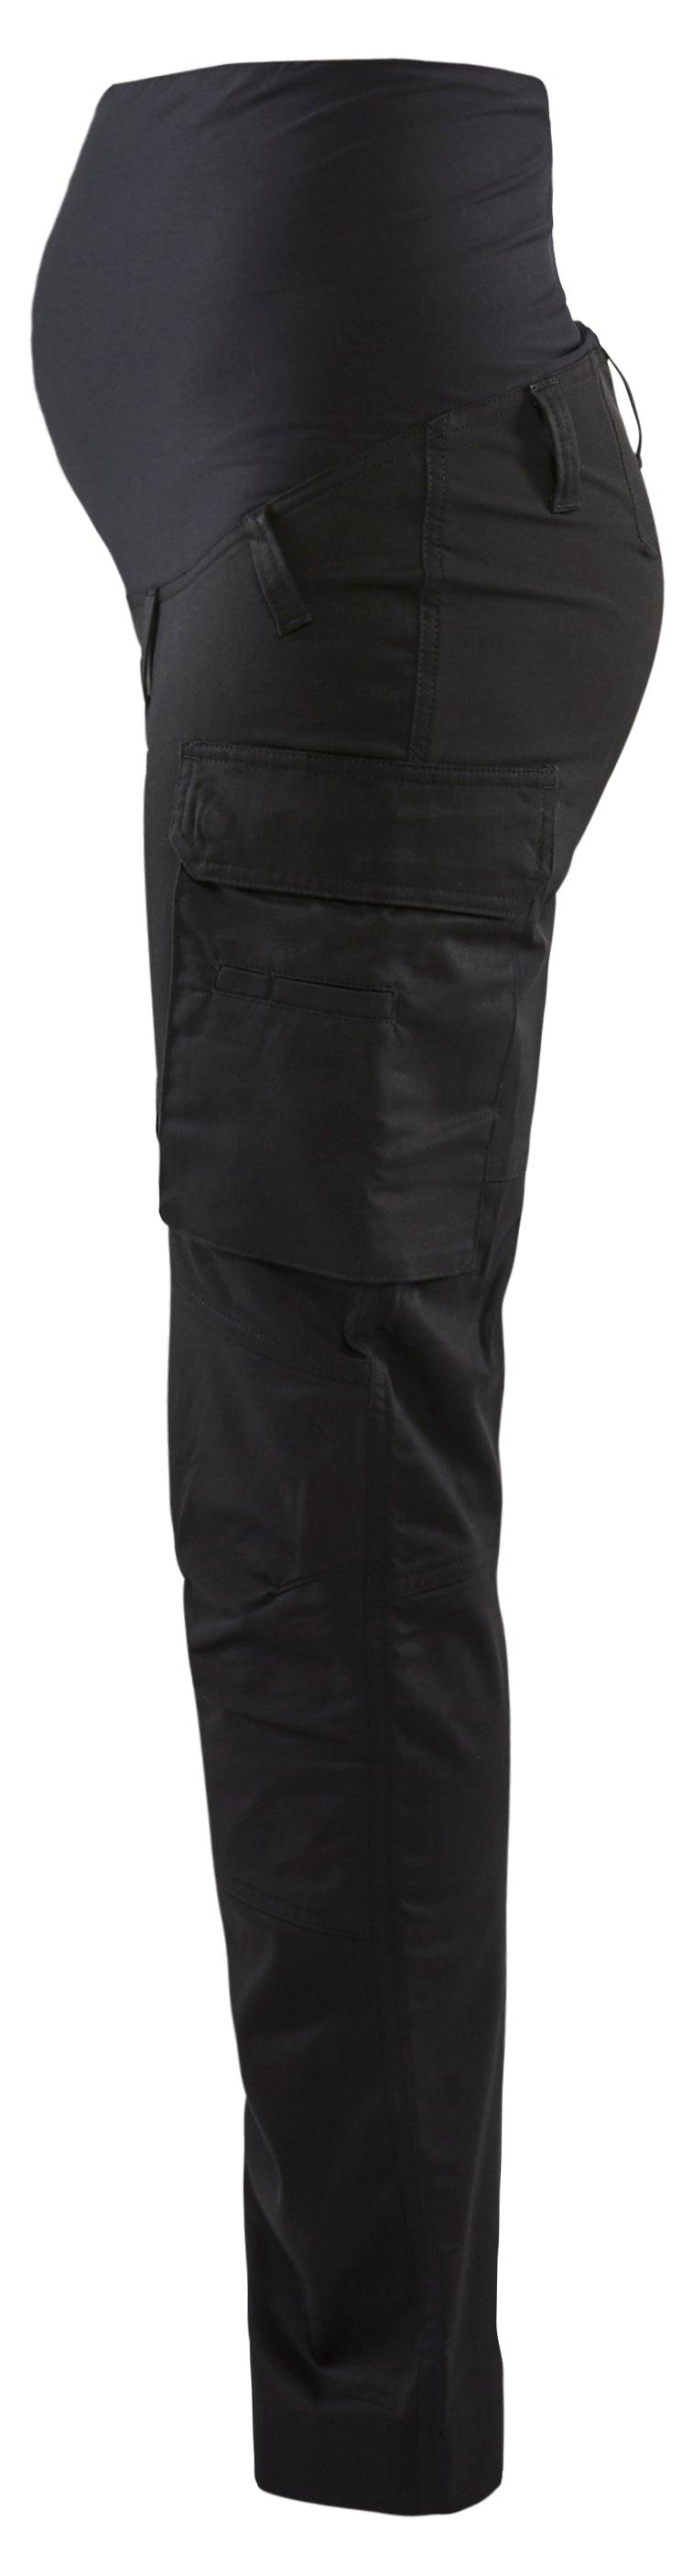 Portwest Womens/Ladies S234 Stretch Maternity Work Trousers